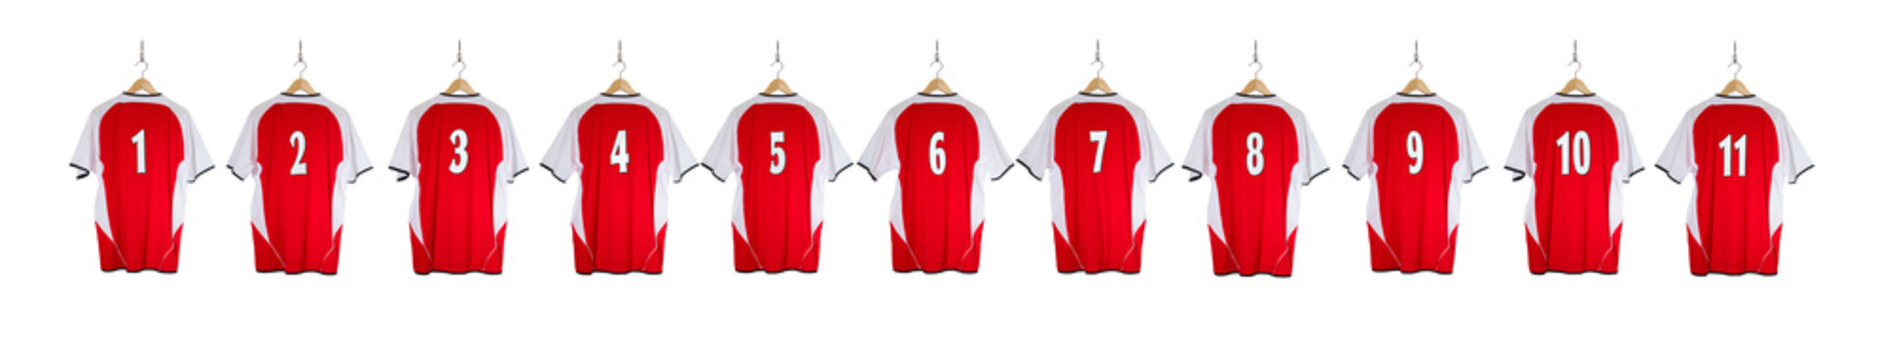 Row of Red Football Shirts  isolated on white background